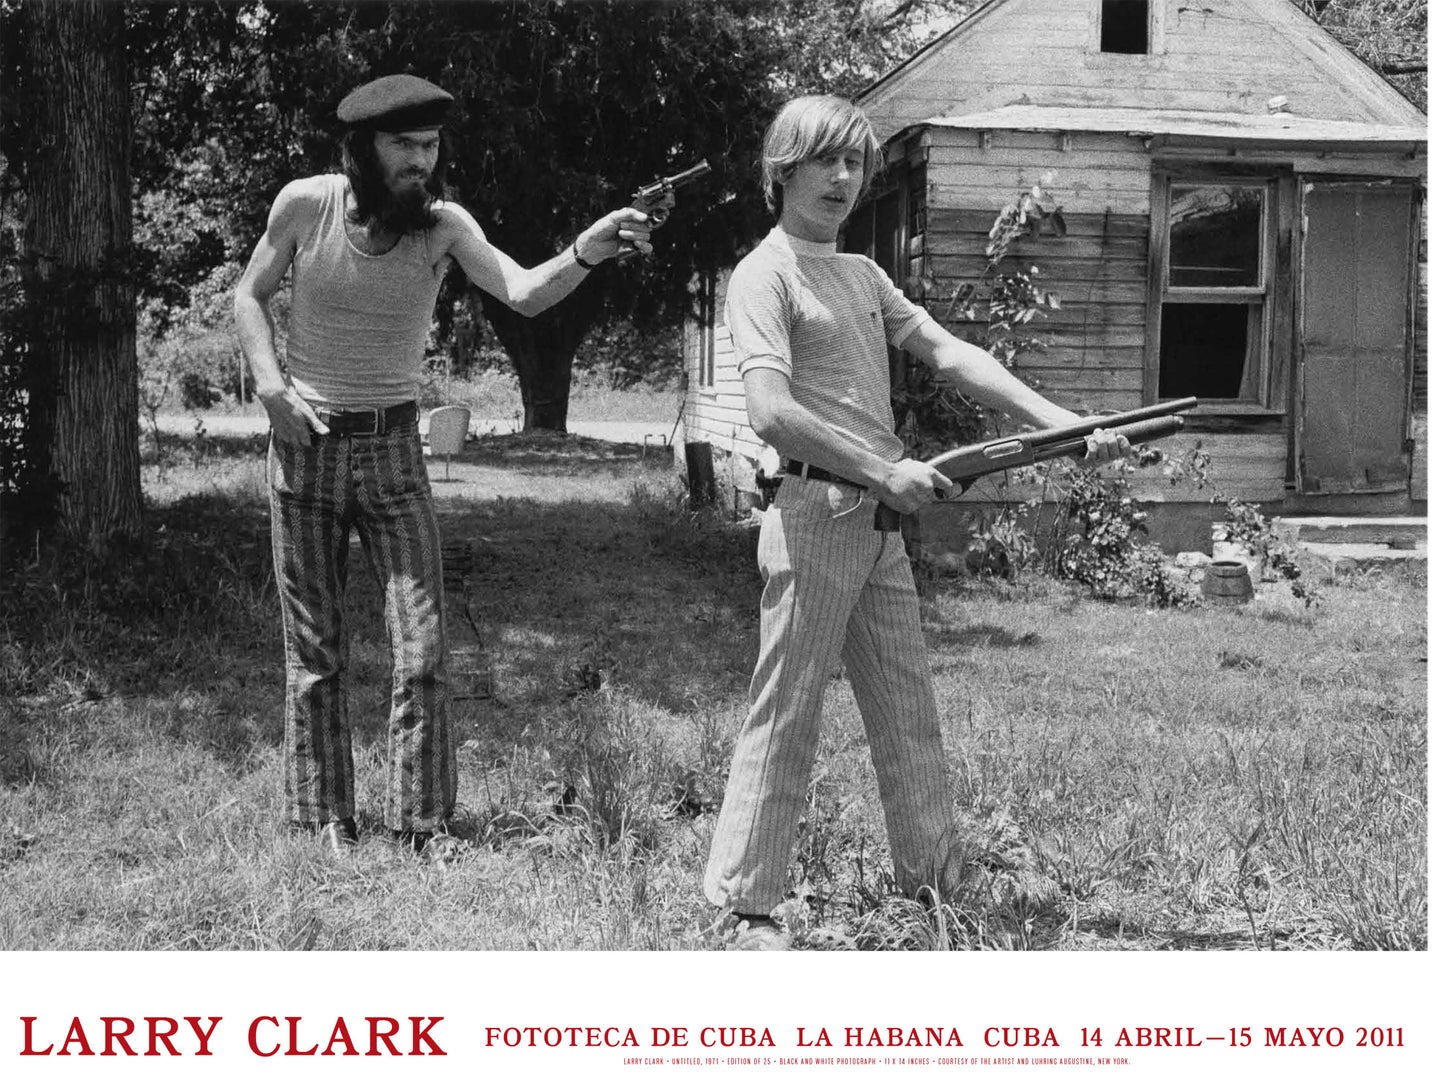 Poster from Larry Clark's 2011 exhibition in Cuba, white a black and white photo of two male figures with guns.